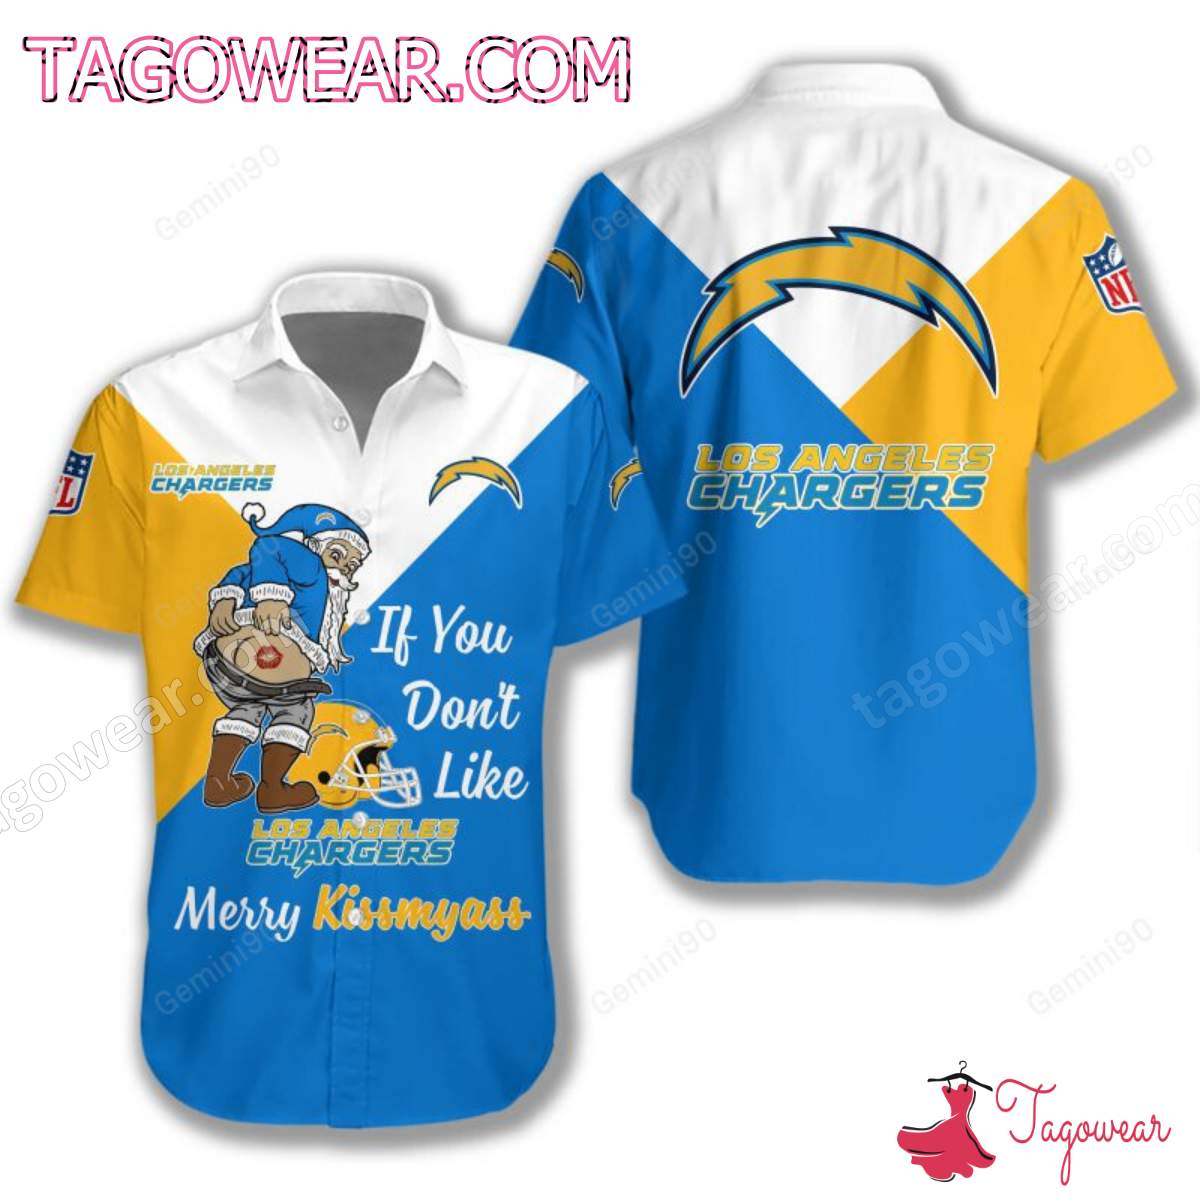 If You Don't Like Los Angeles Chargers Merry Kissmyass T-shirt, Polo, Hoodie a